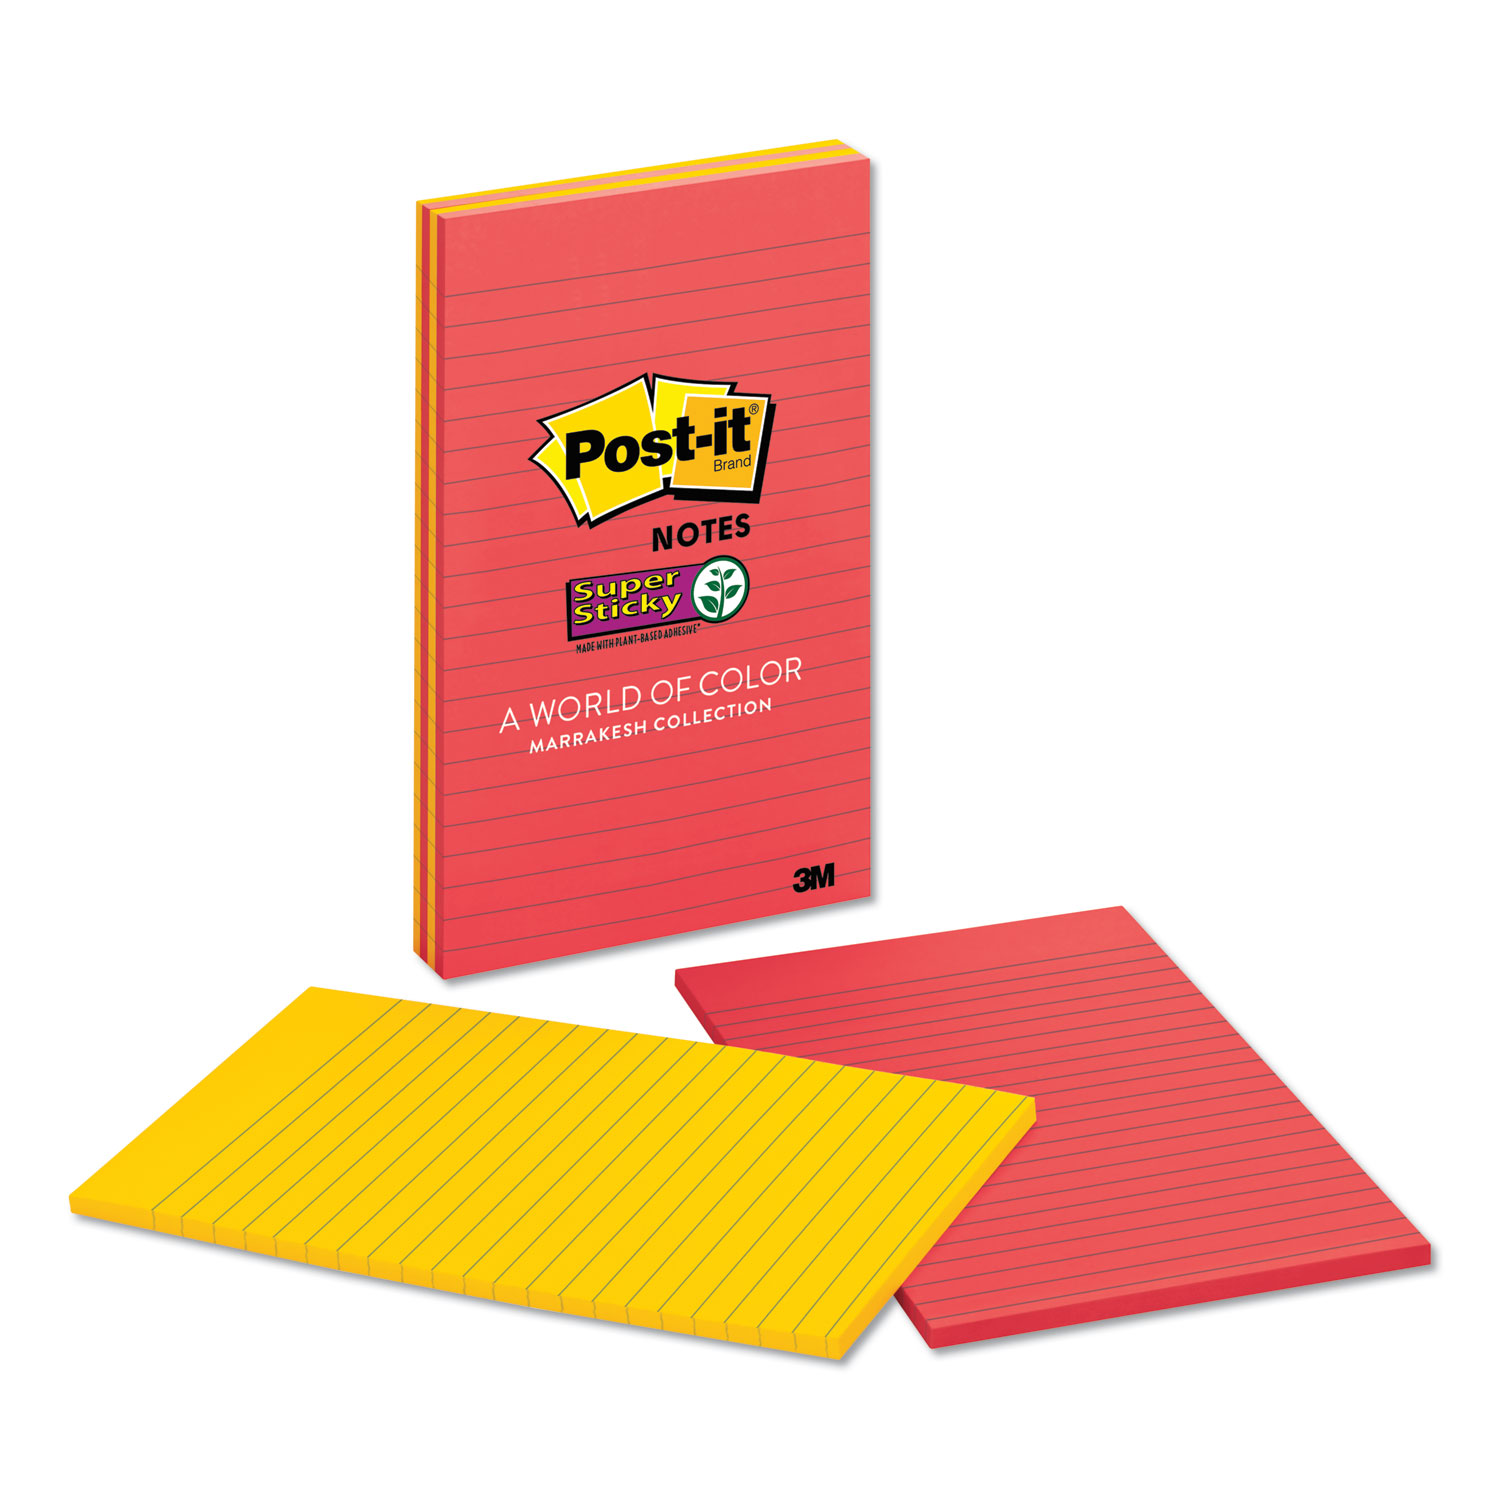  Post-it Notes Super Sticky 5845-SSAN Pads in Marrakesh Colors, Lined, 5 x 8, 45-Sheet, 4/Pack (MMM5845SSAN) 